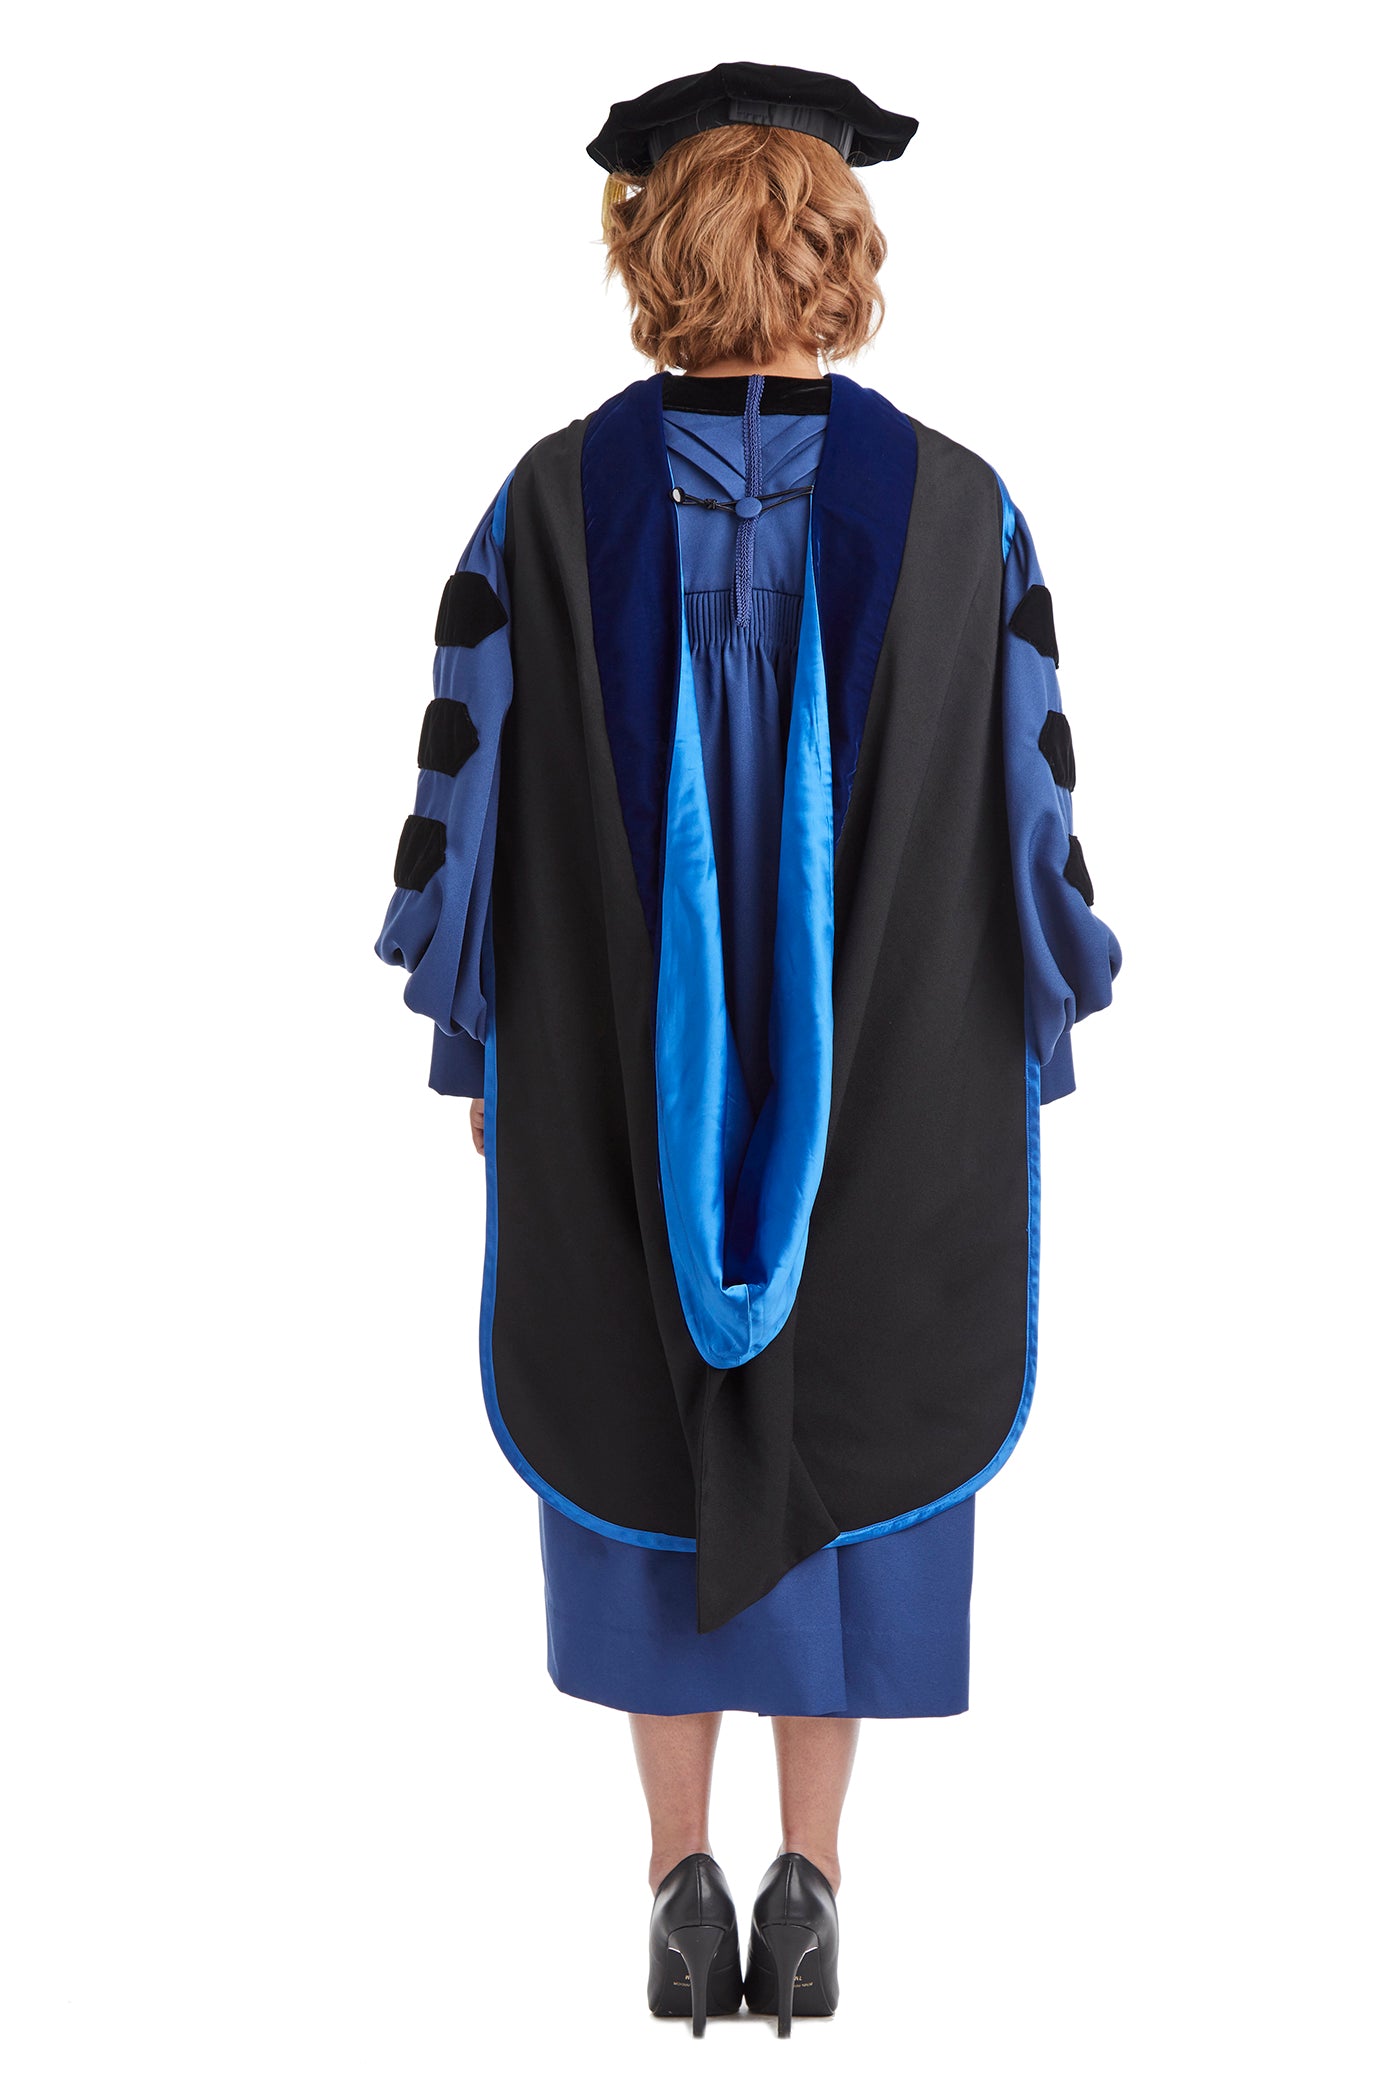 Yale University Doctoral Regalia Set. Doctoral Gown, PhD Hood, and Eight Sided Doctoral Tam with Tassel